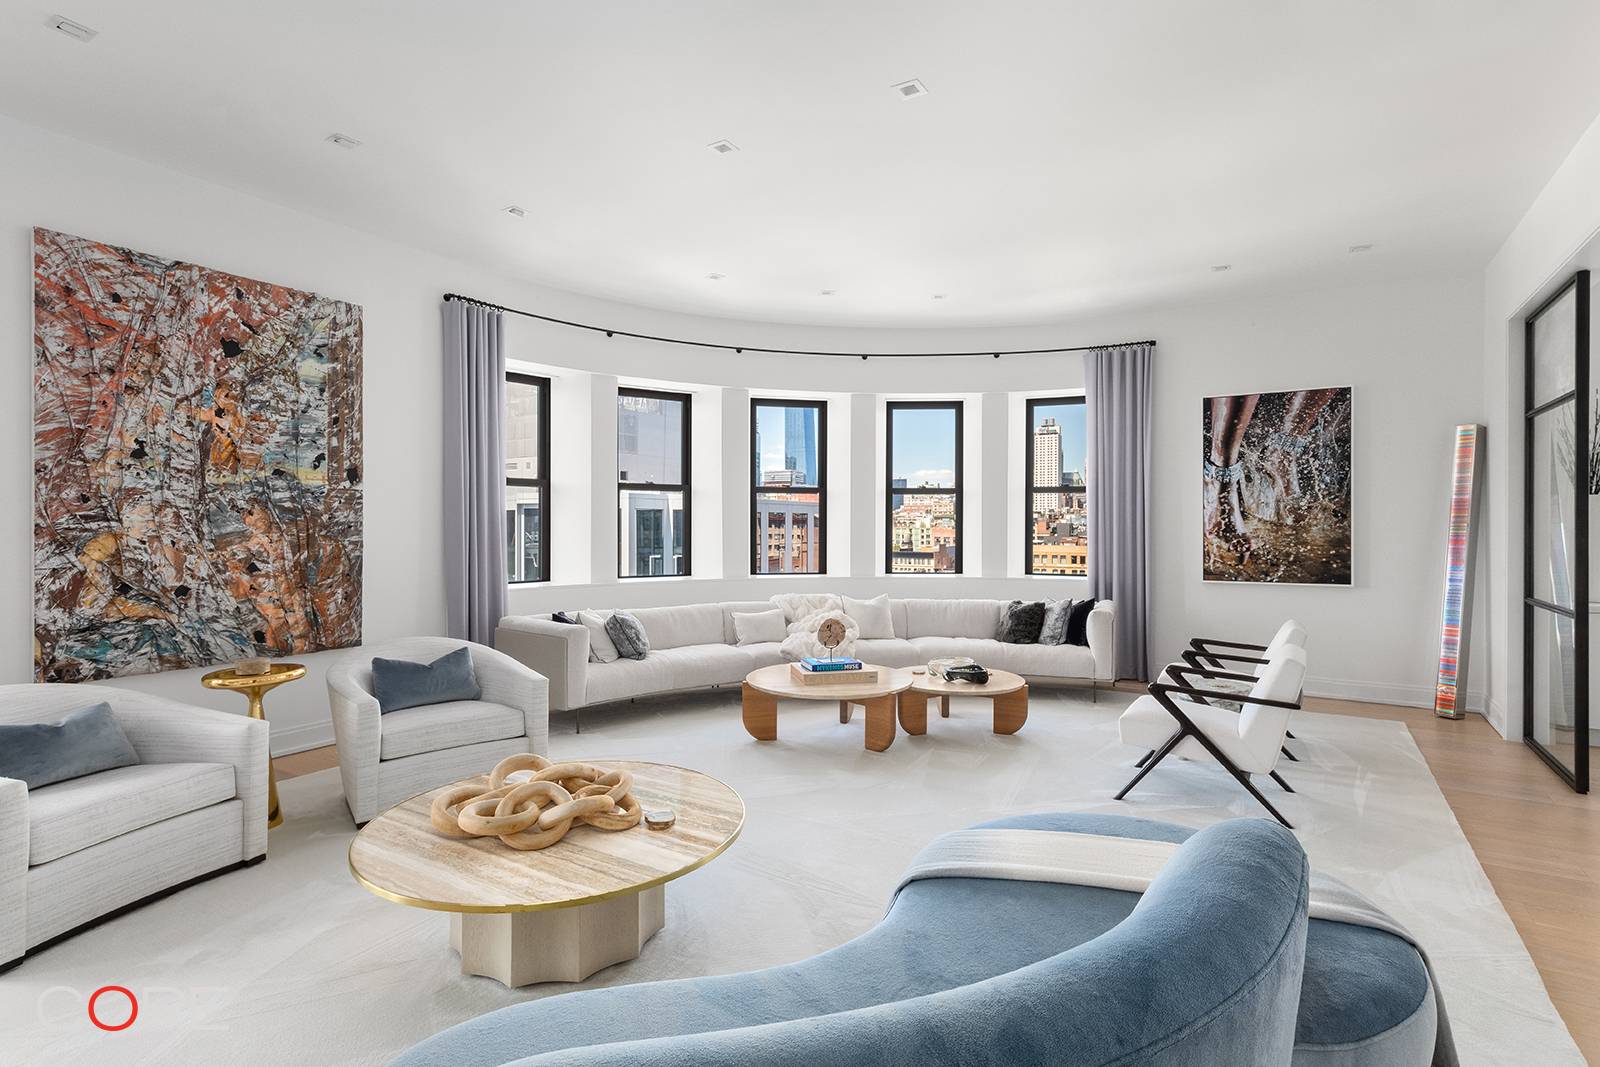 An art lover's dream, this stunning 4, 535 square foot, four bedroom, corner unit loft boasts soaring 12 foot ceilings, an abundance of natural light, and sweeping views to the ...